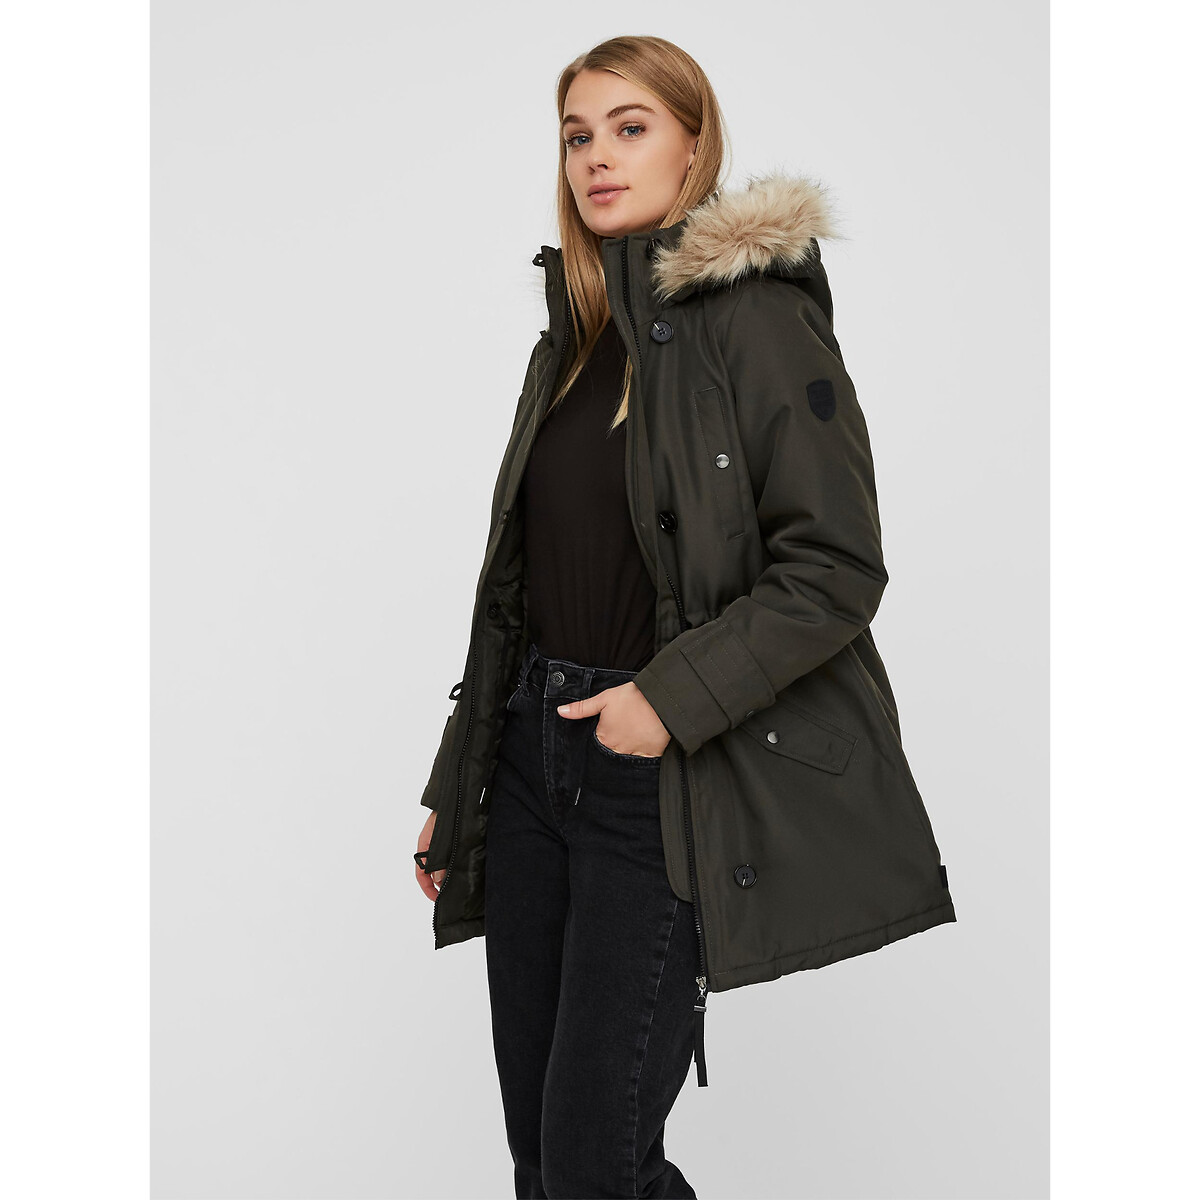 Mægtig Articulation stor Mid-length parka with faux fur hood and pockets dark green Vero Moda | La  Redoute